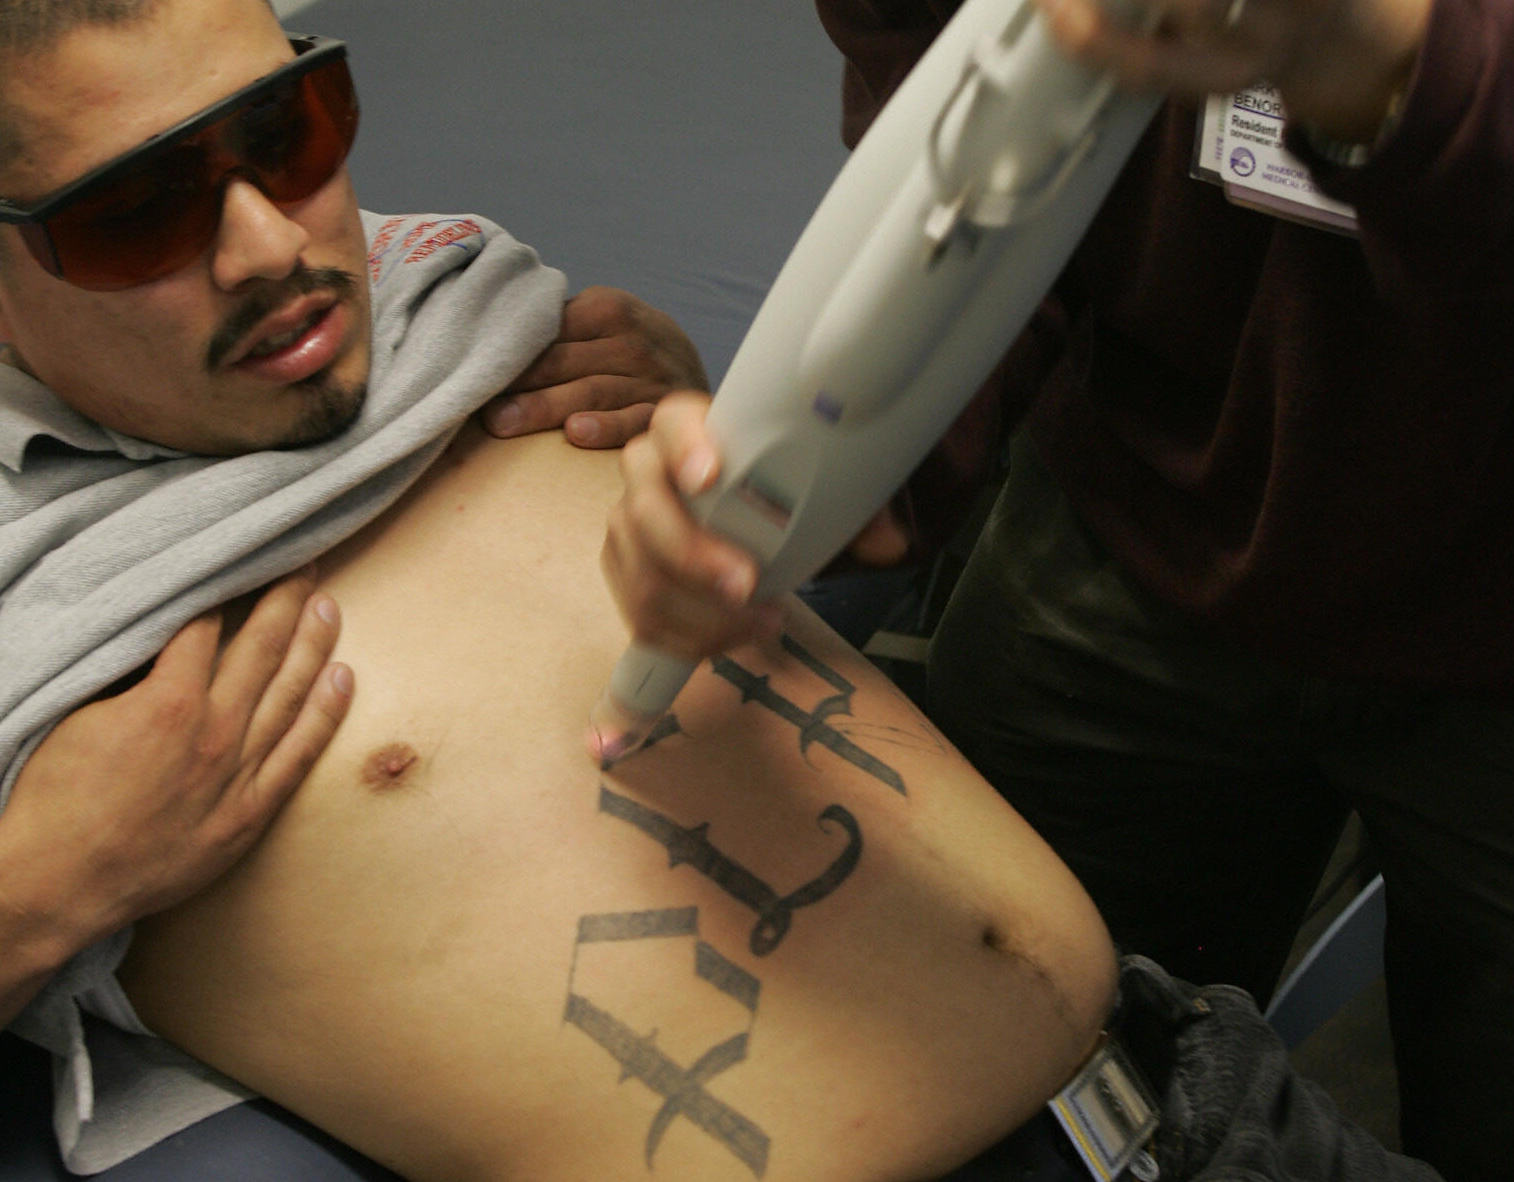 Does Laser Tattoo Removal Leave Scars? | HealthNews